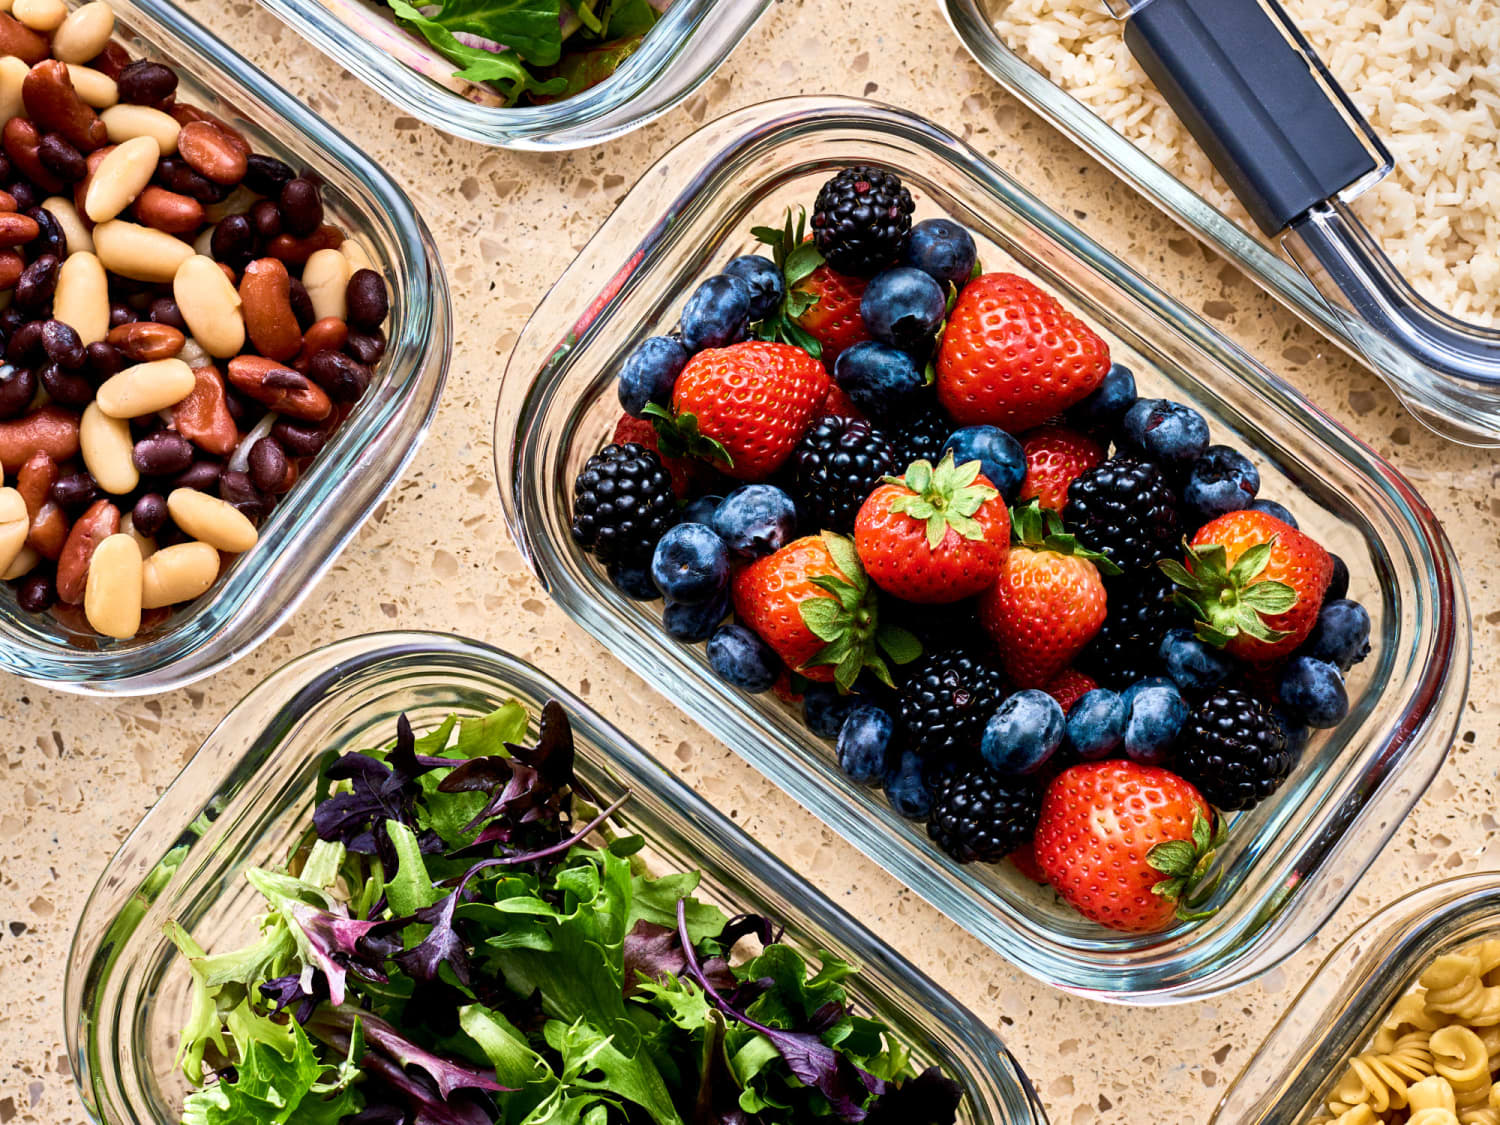 The 8 Best Food Storage Solutions for 2022